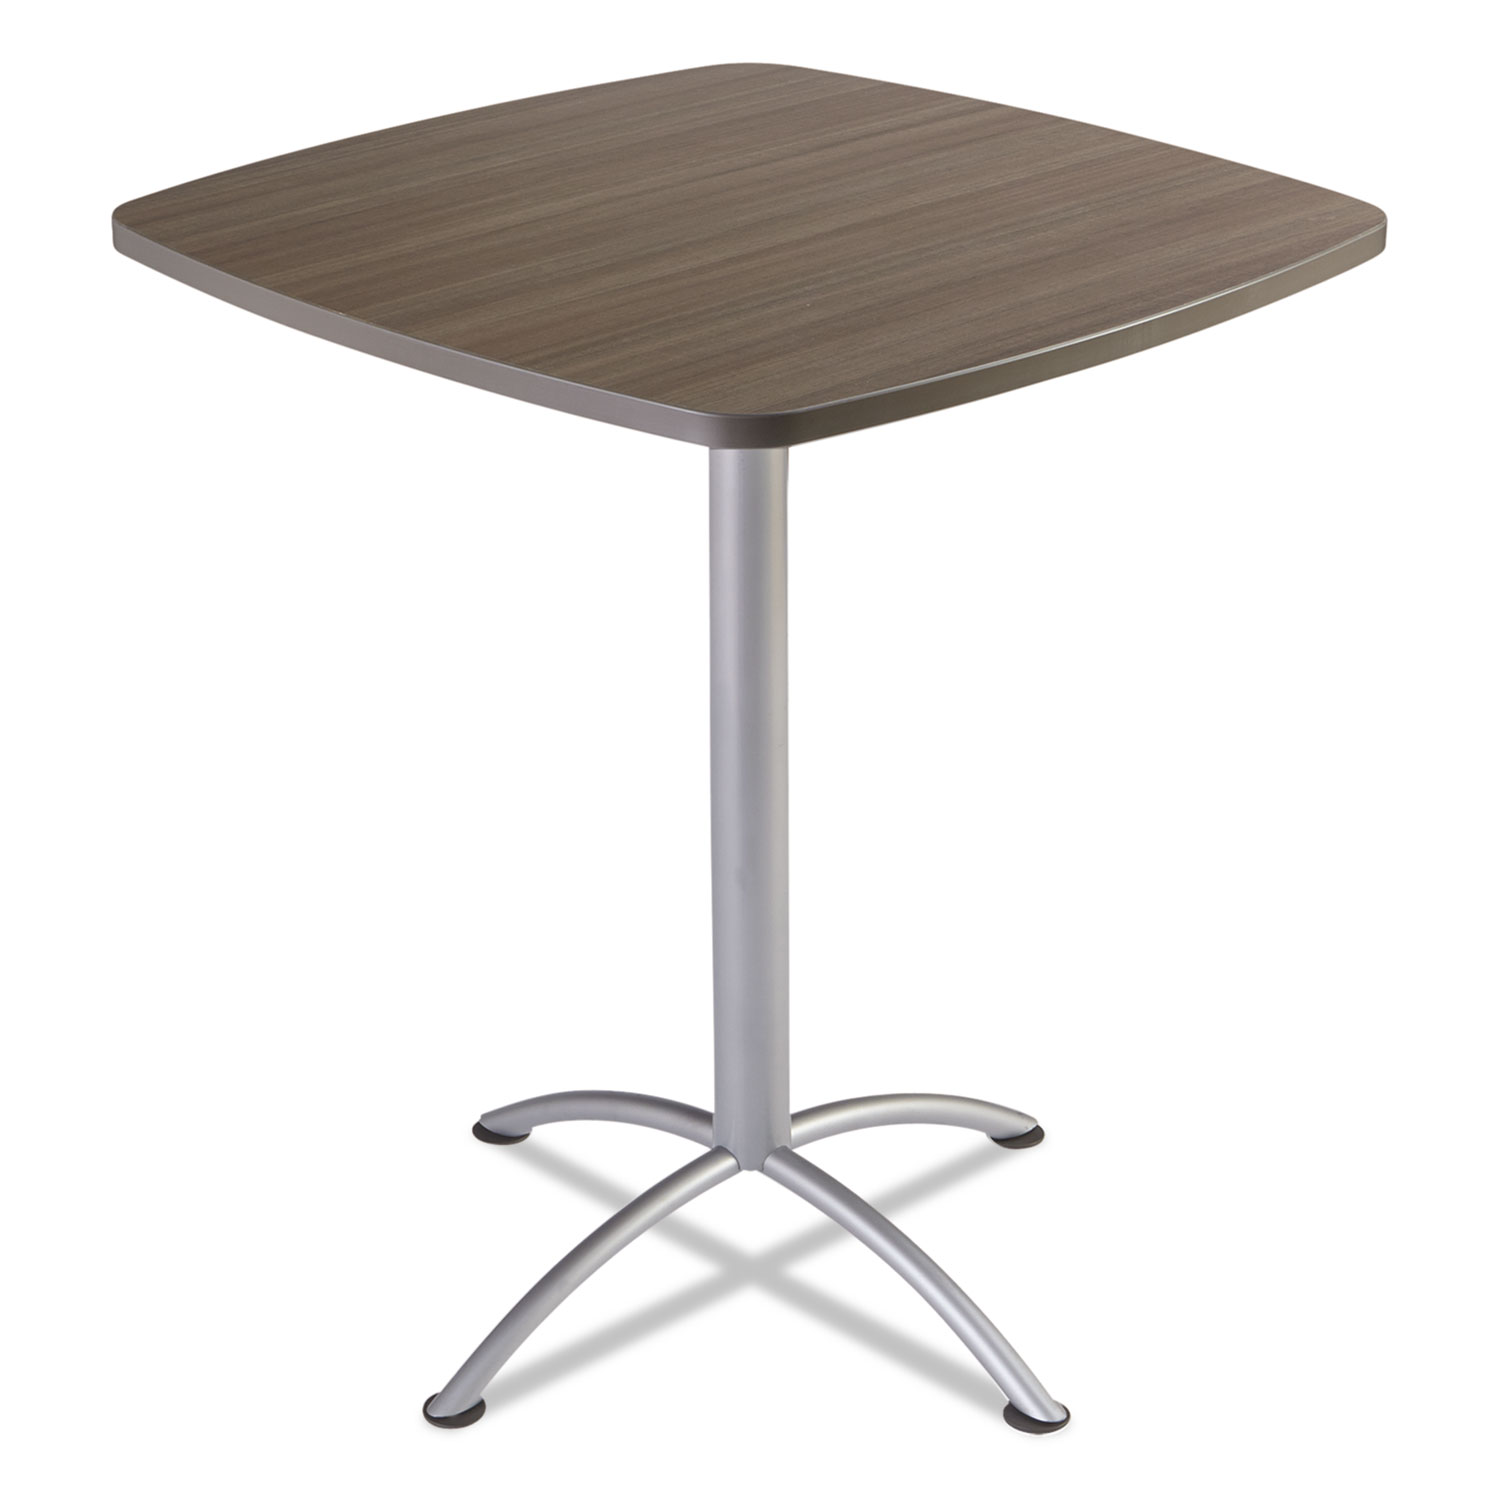 iLand Table, Contour, Square Seated Style, 42 x 42 x 42, Natural Teak/Silver